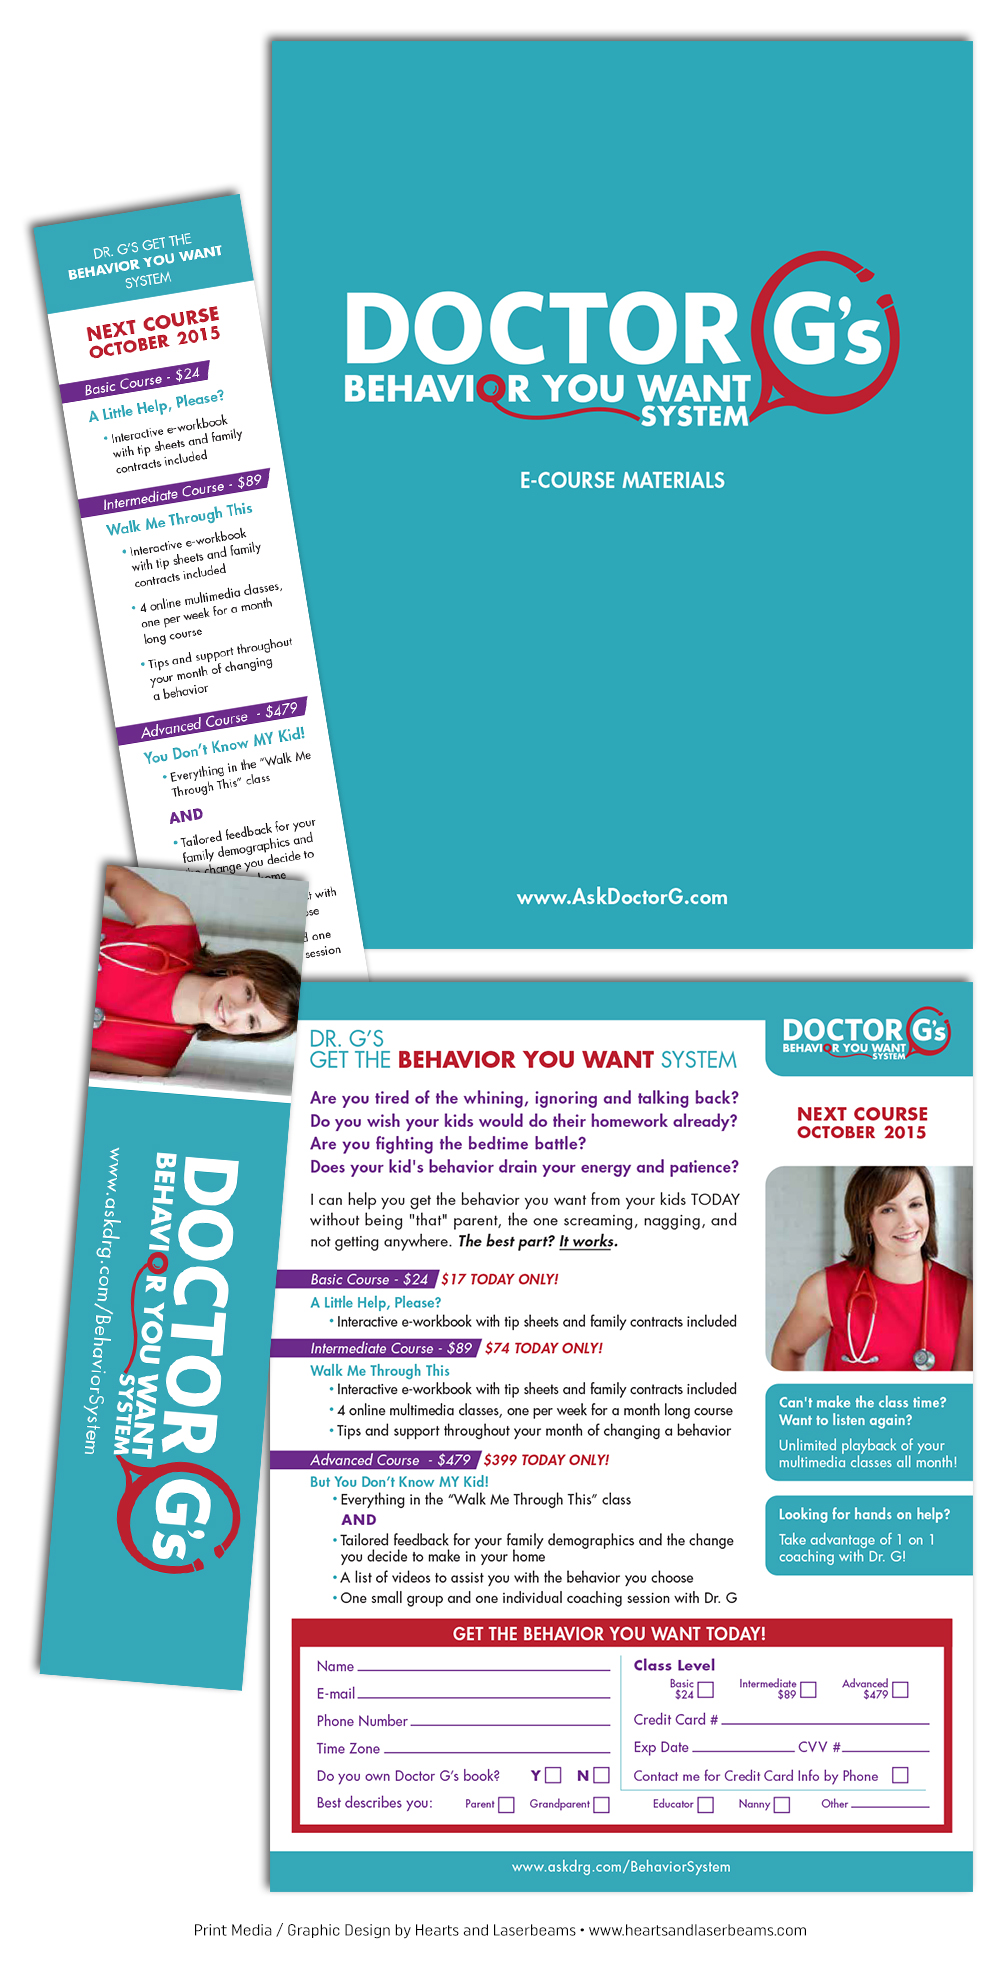 Print Media - Graphic Design Portfolio - Layout and Interactive E-book layout for Doctor G by Hearts and Laserbeams